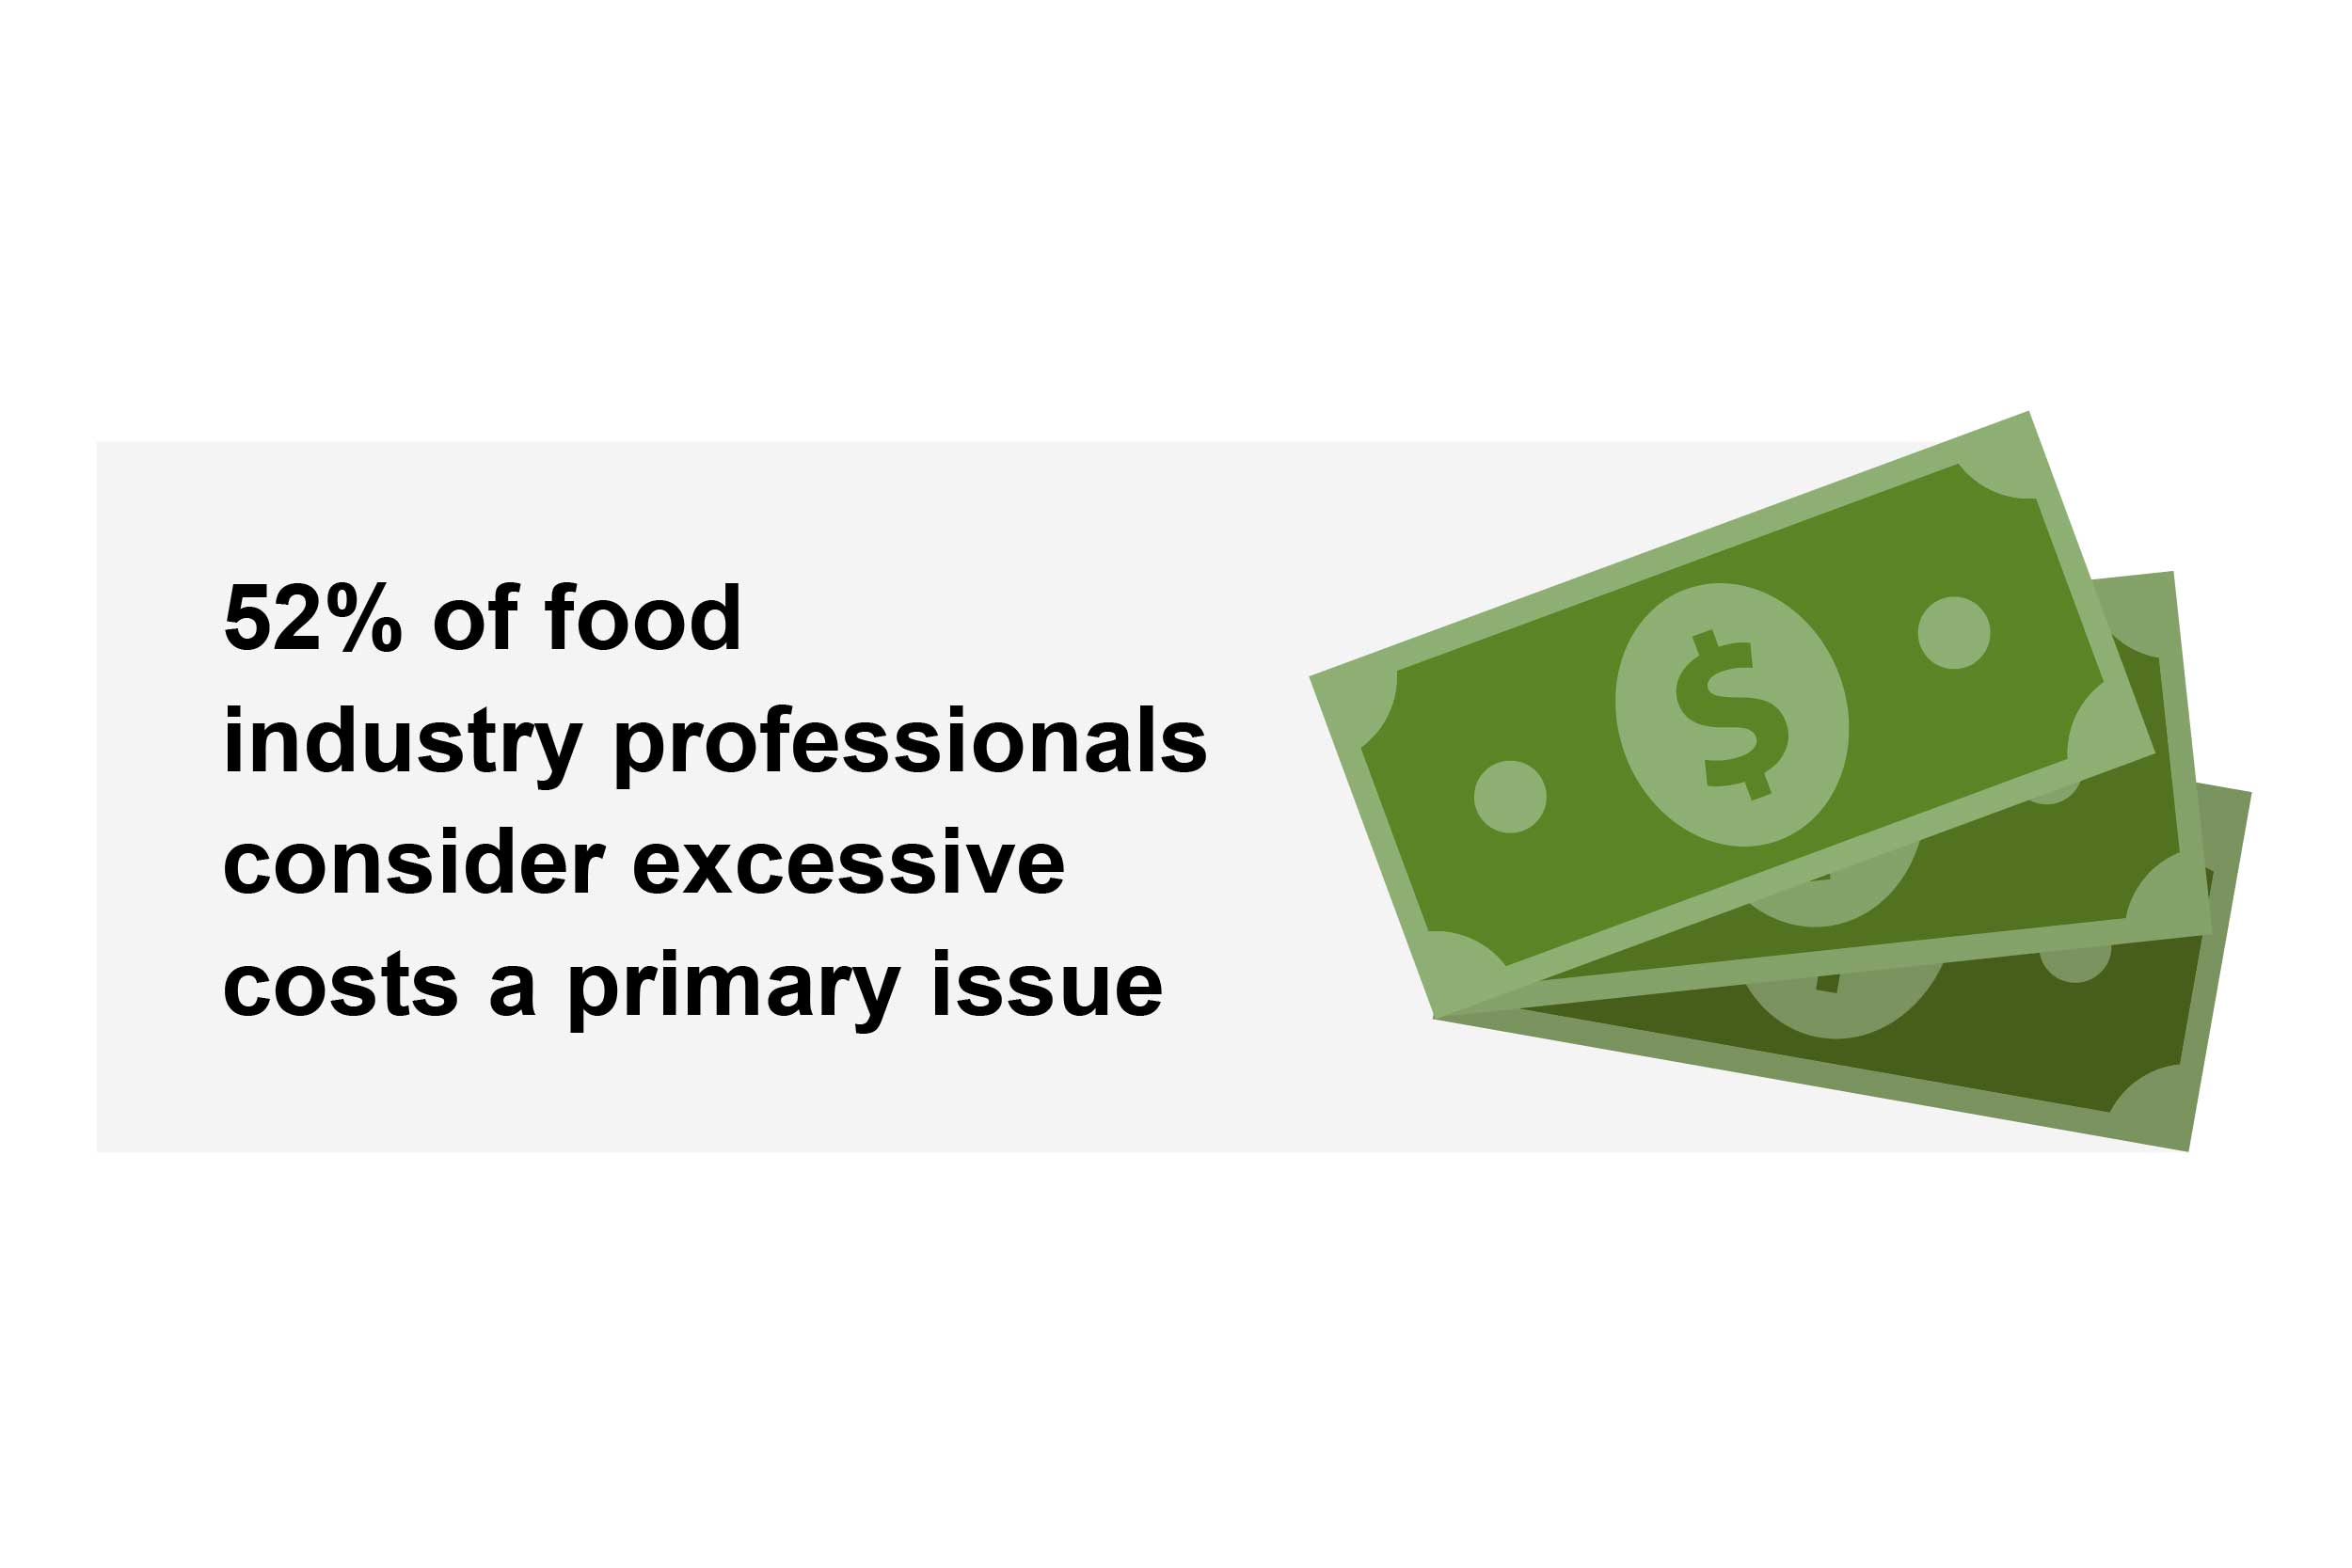 Fifty-two percent of food professionals consider excessive costs a primary issue.